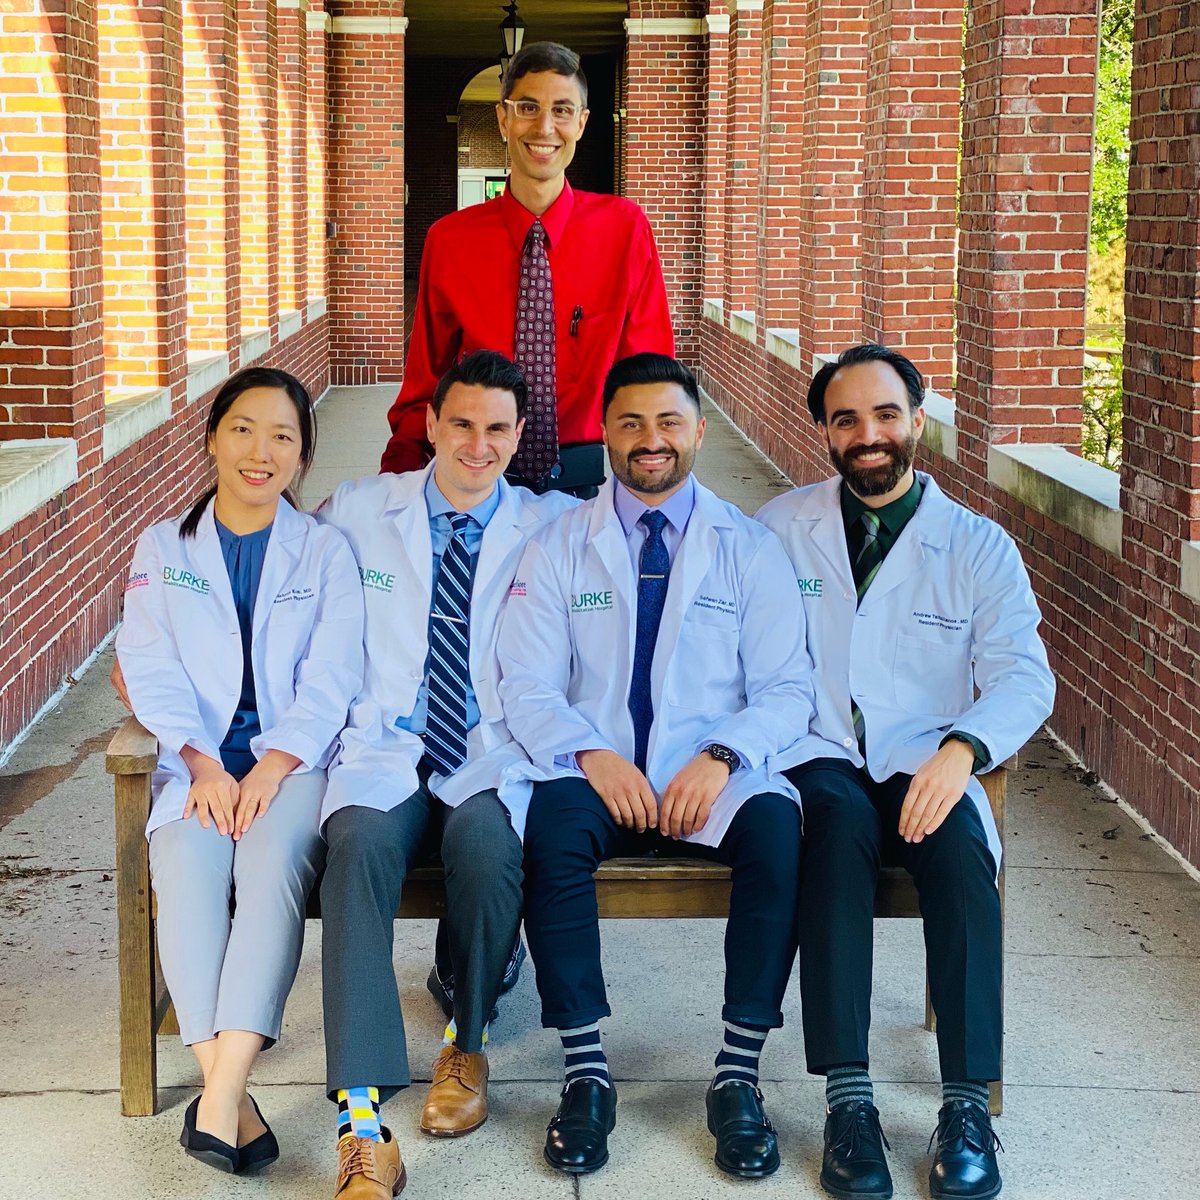 Excited to announce our new
CHIEF RESIDENTS! 👏🎉💪🎊
.
Nahyun Kim, MD
Aaron Greenberg, DO
Safwan Zar, MD 
Andrew Tsitsilianos, MD.                       #Physiatry #Residency #PMR #Medicine #ChiefResidents